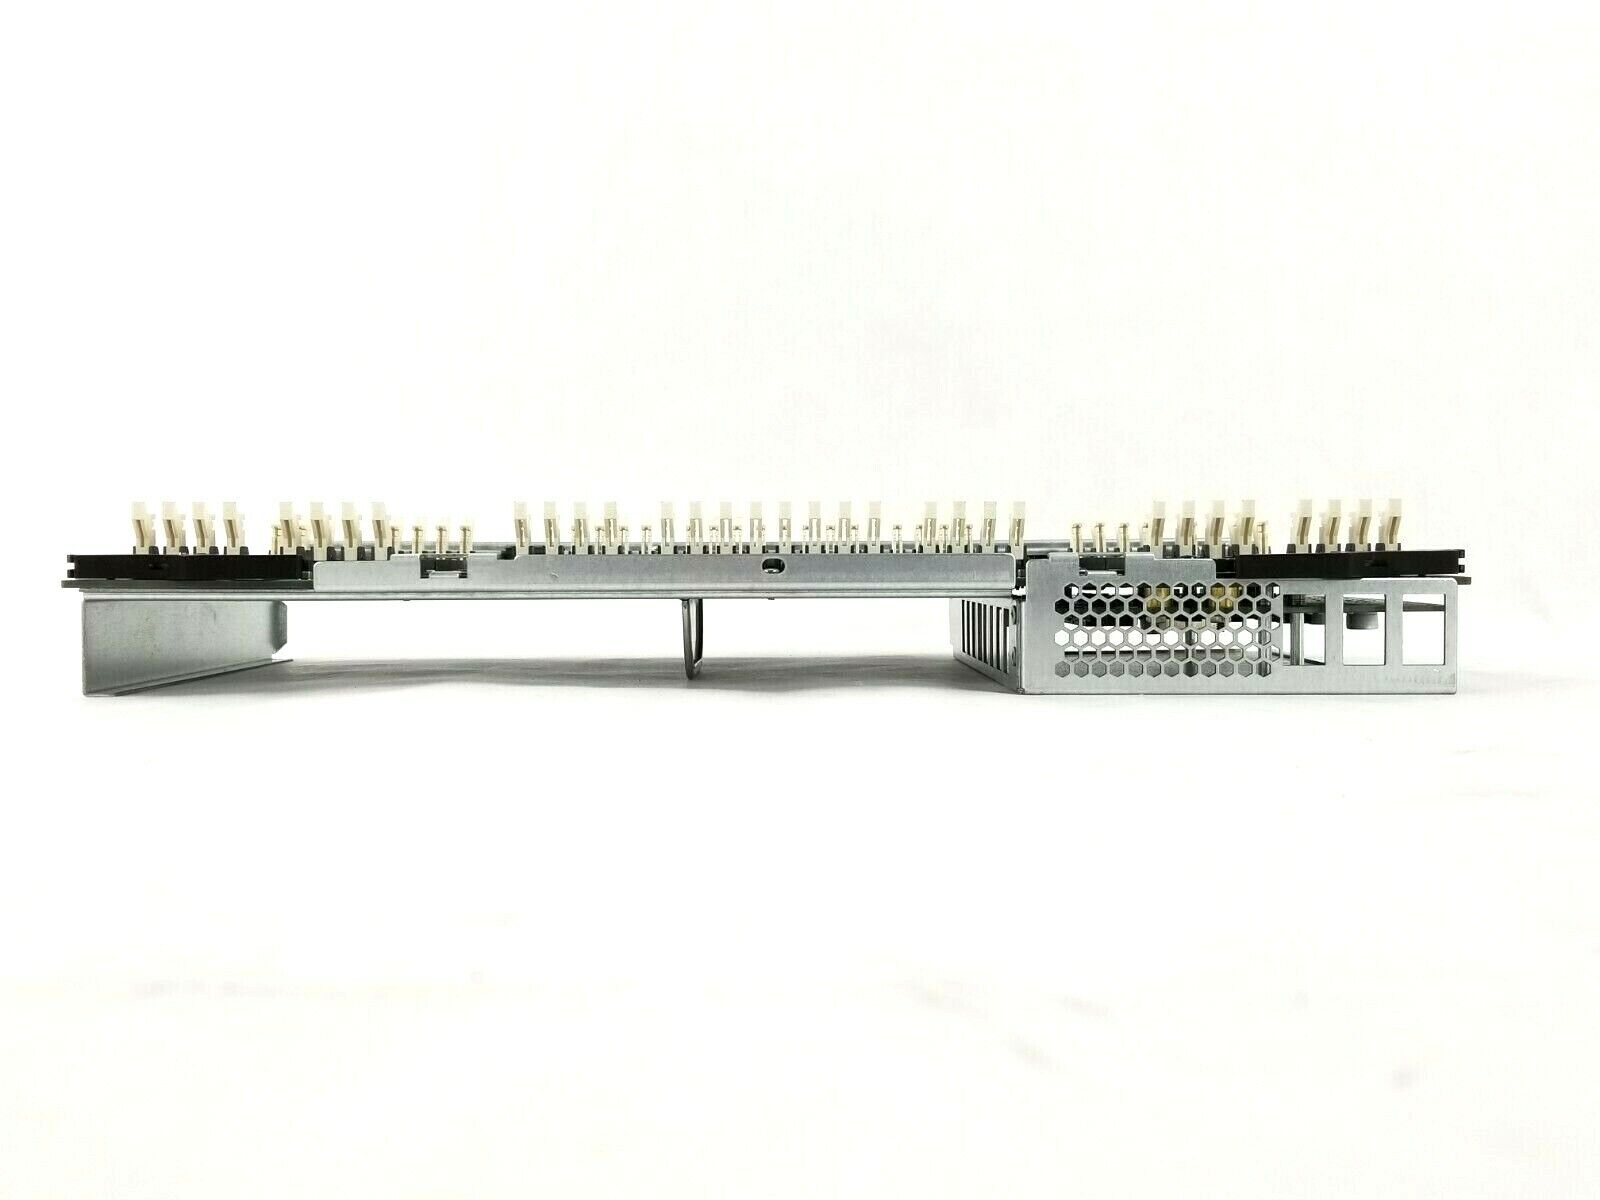 HP A7124-60102 32 DIMM Memory Carrier